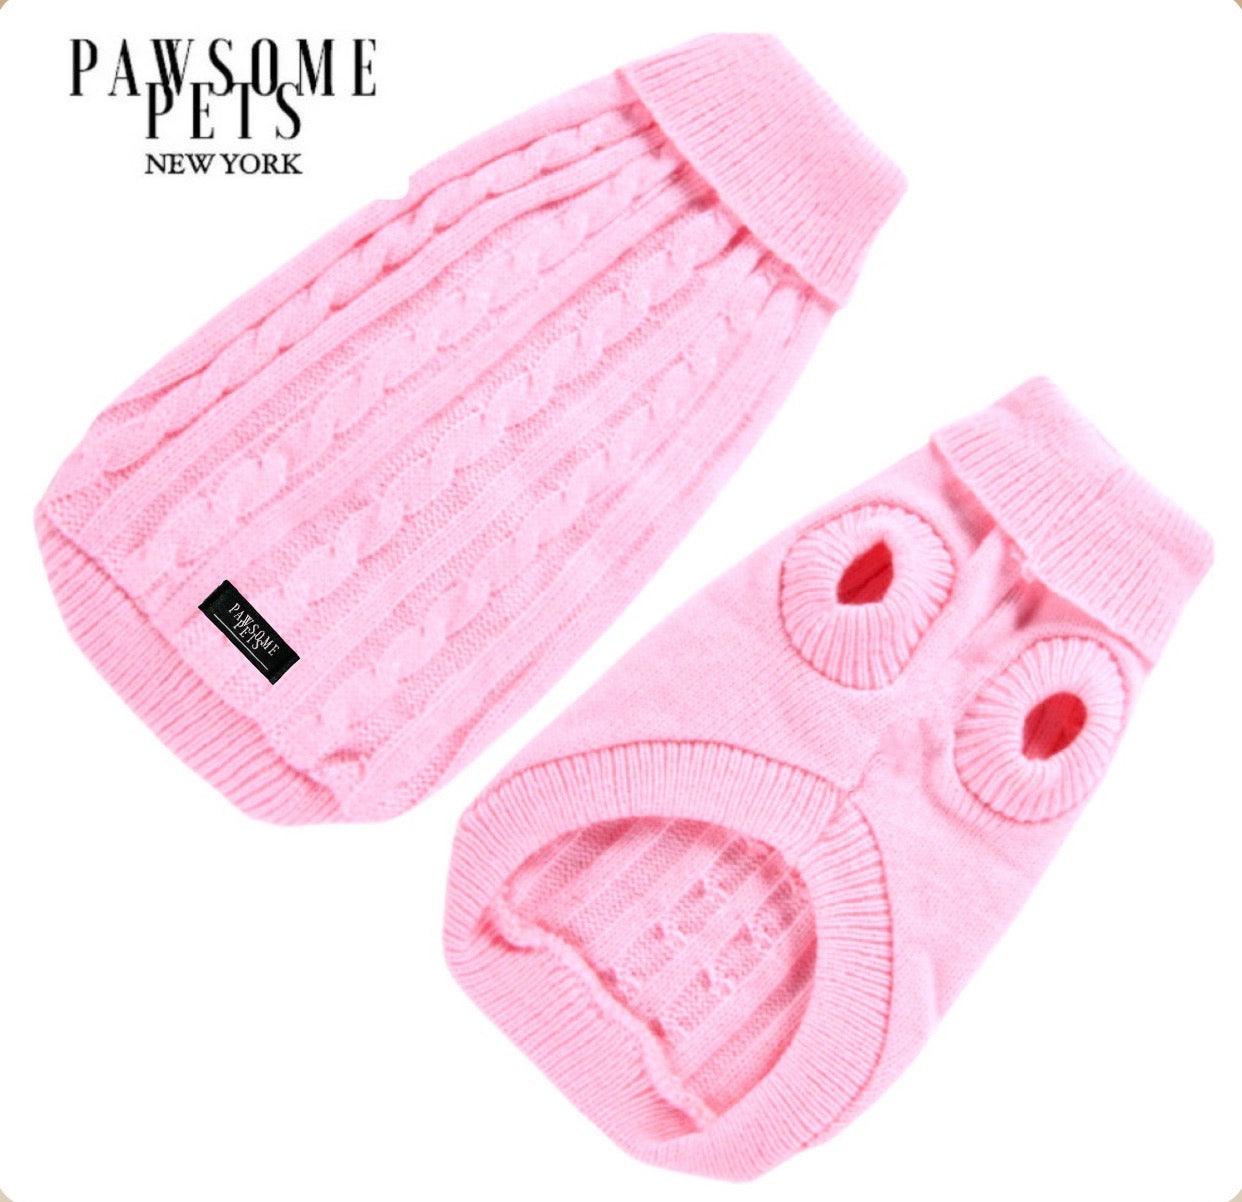 DOG AND CAT CABLE KNIT SWEATER - LIGHT PINK - Pawsomepetsnewyork